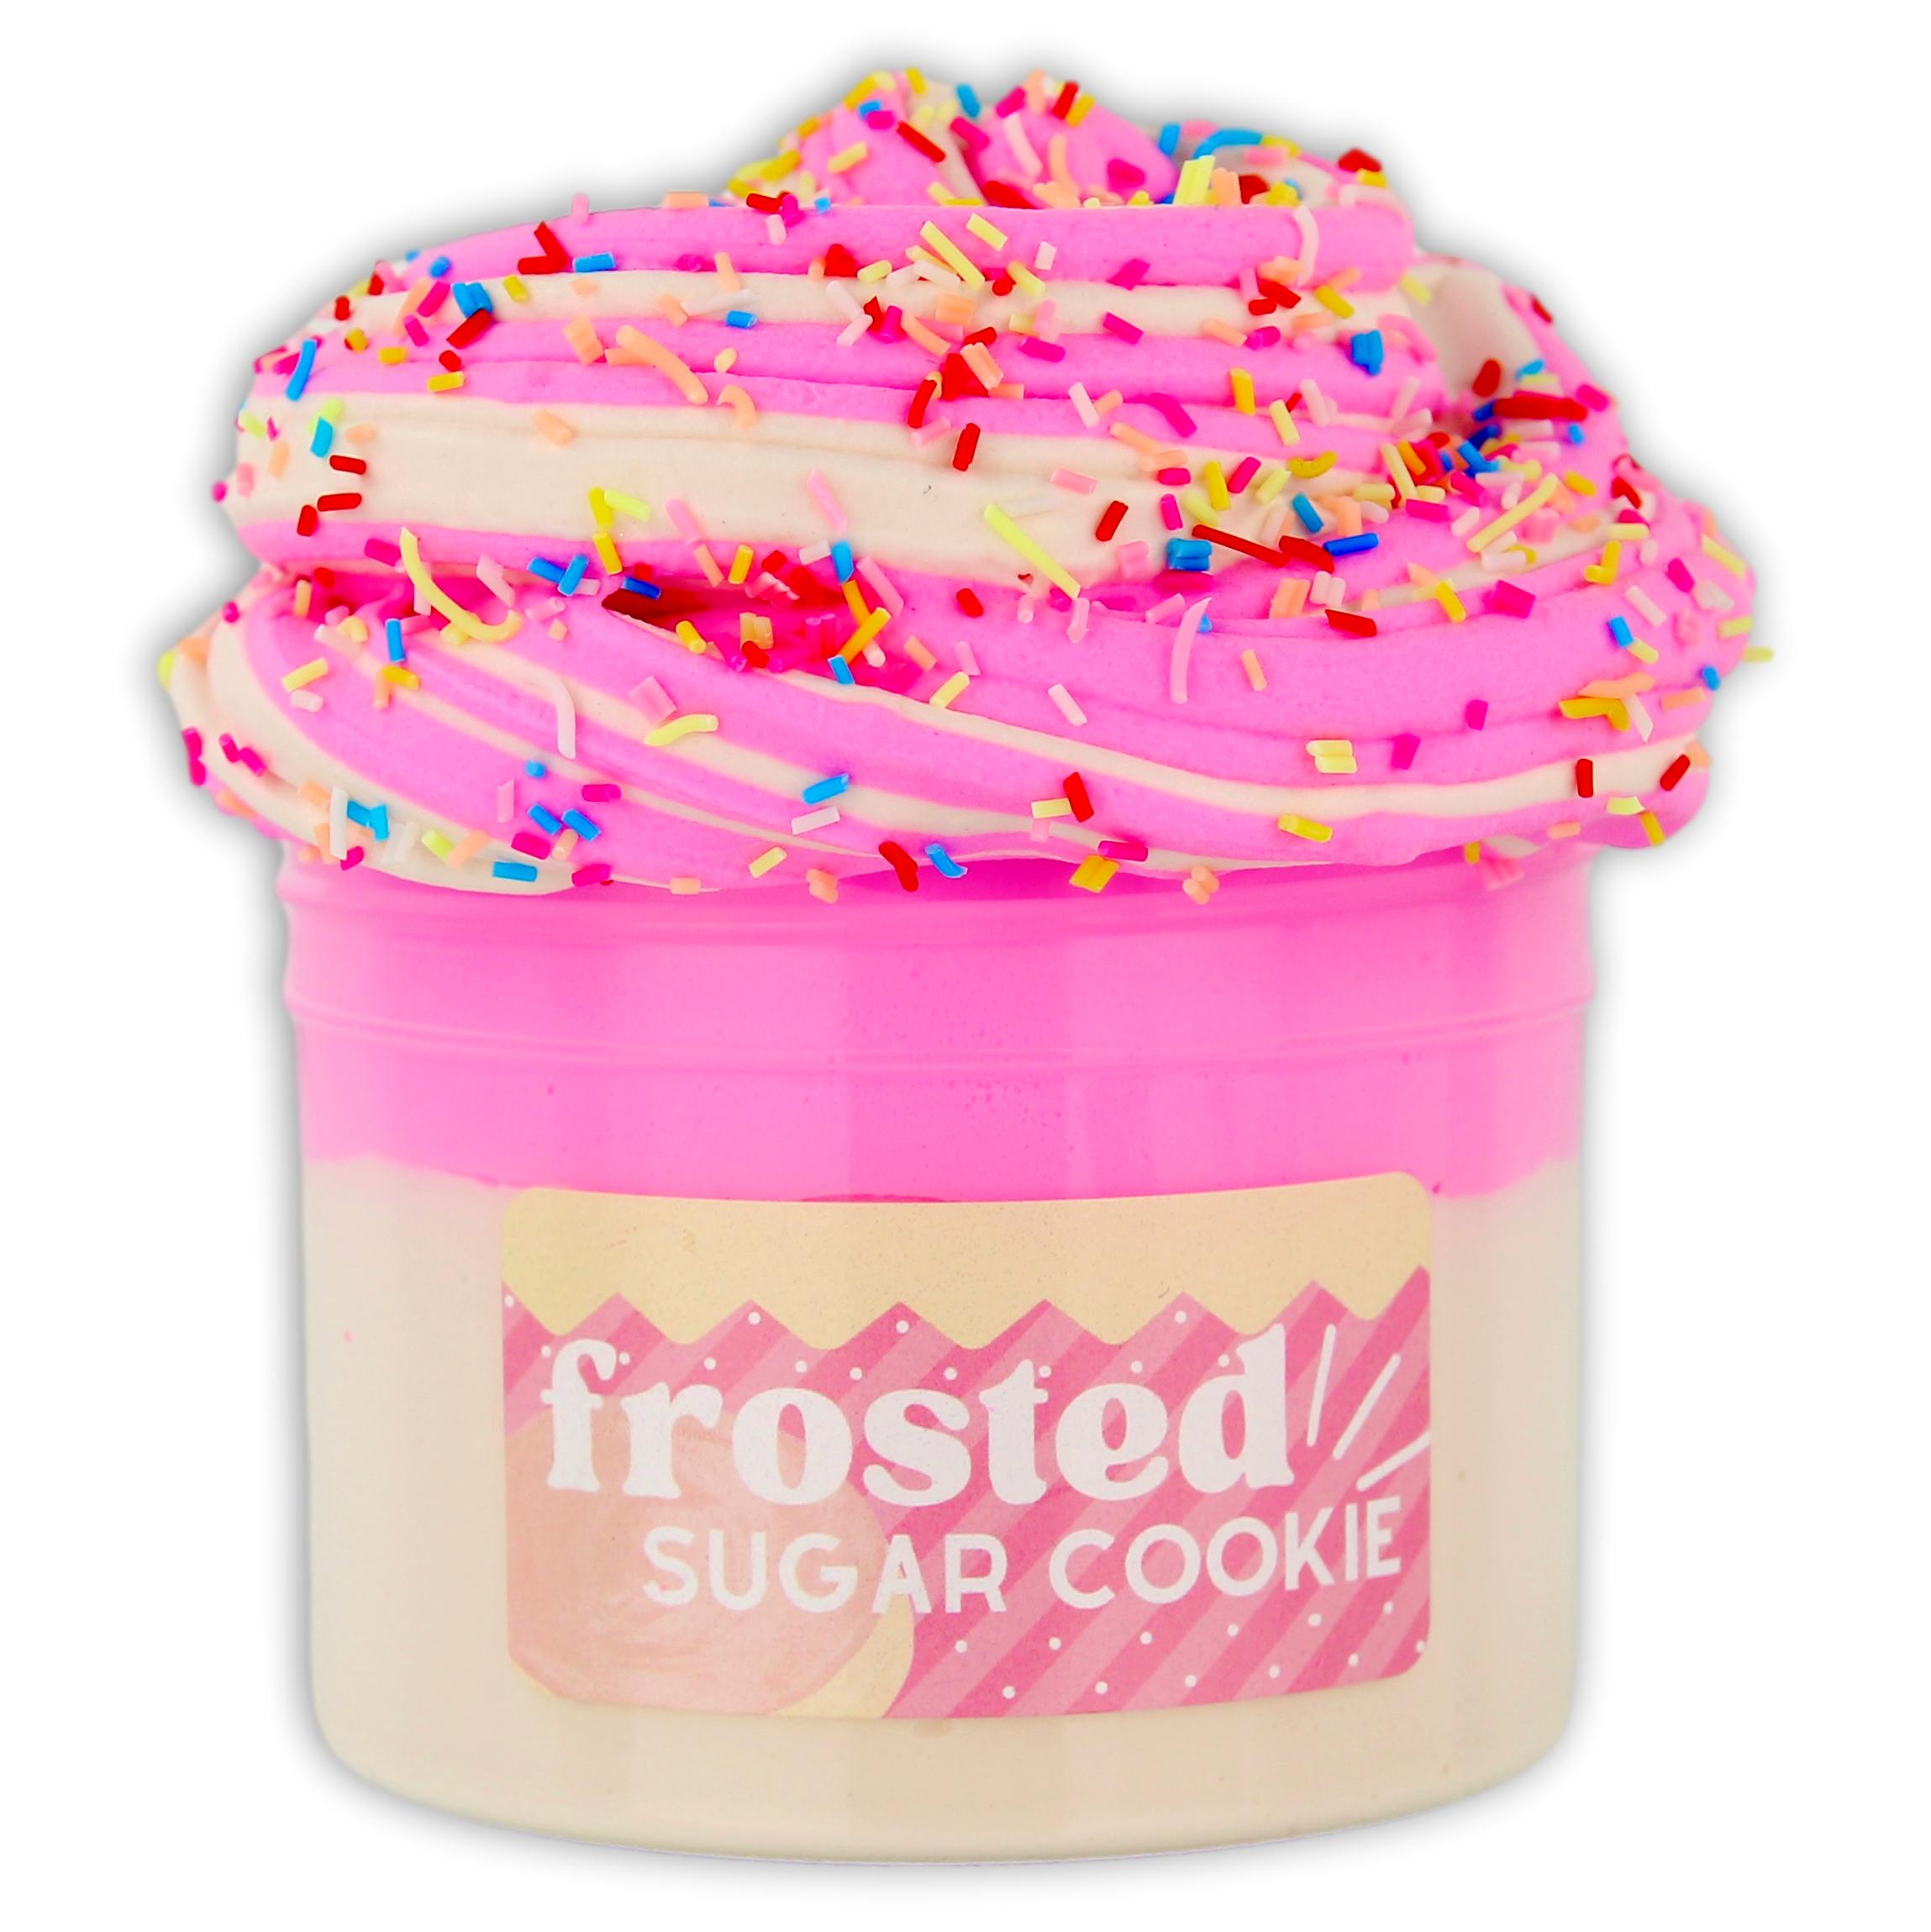 Frosted Sugar Cookie - Wholesale Case of 18